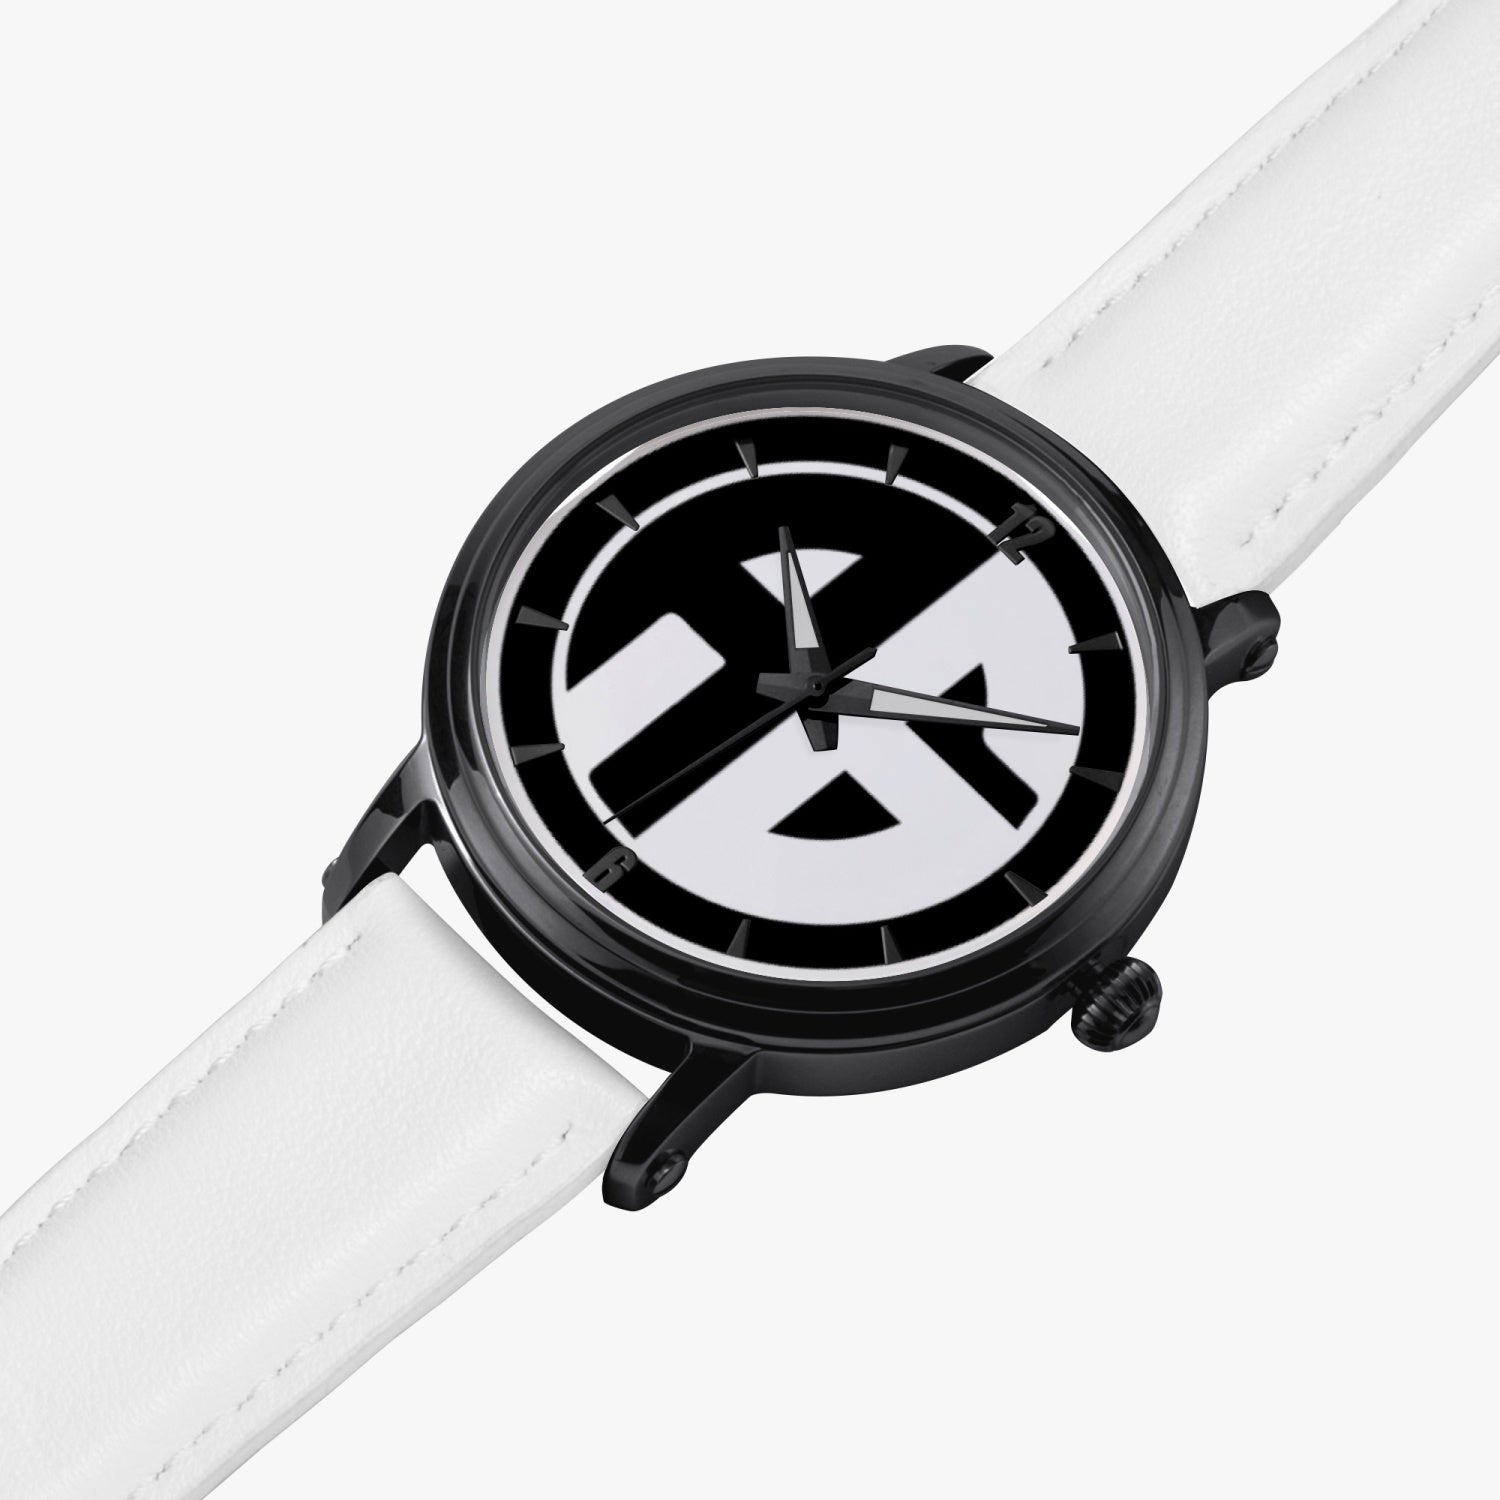 Black case with white band watch lying flat